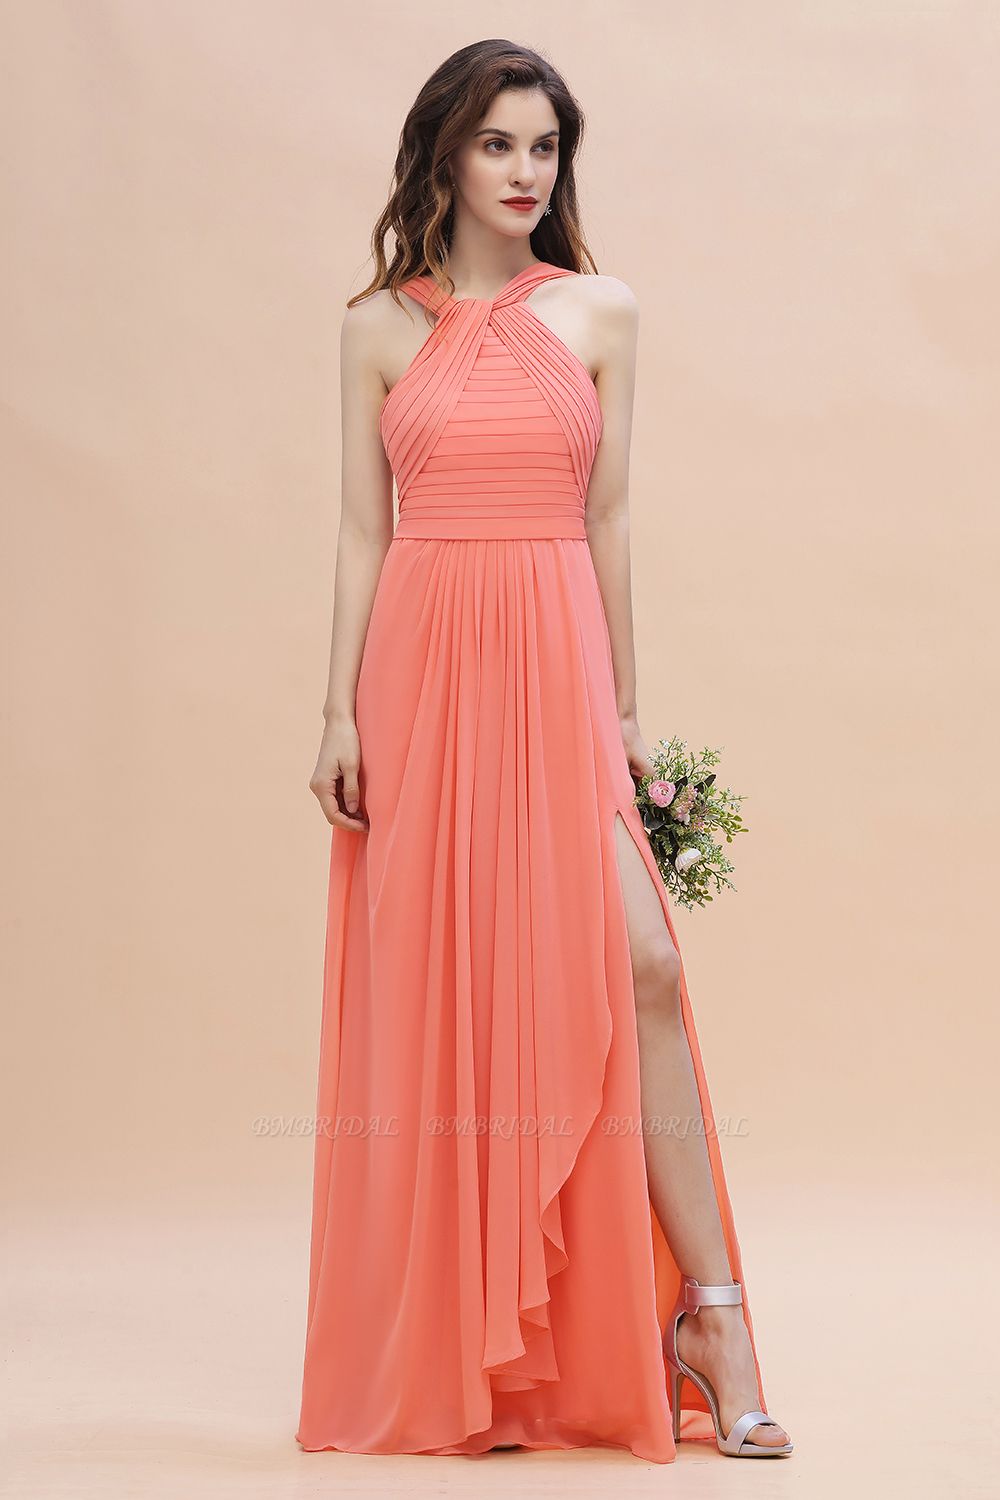 BMbridal Gorgeous A-Line Sleeveless Coral Chiffon Bridesmaid Dress with Ruffles On Sale